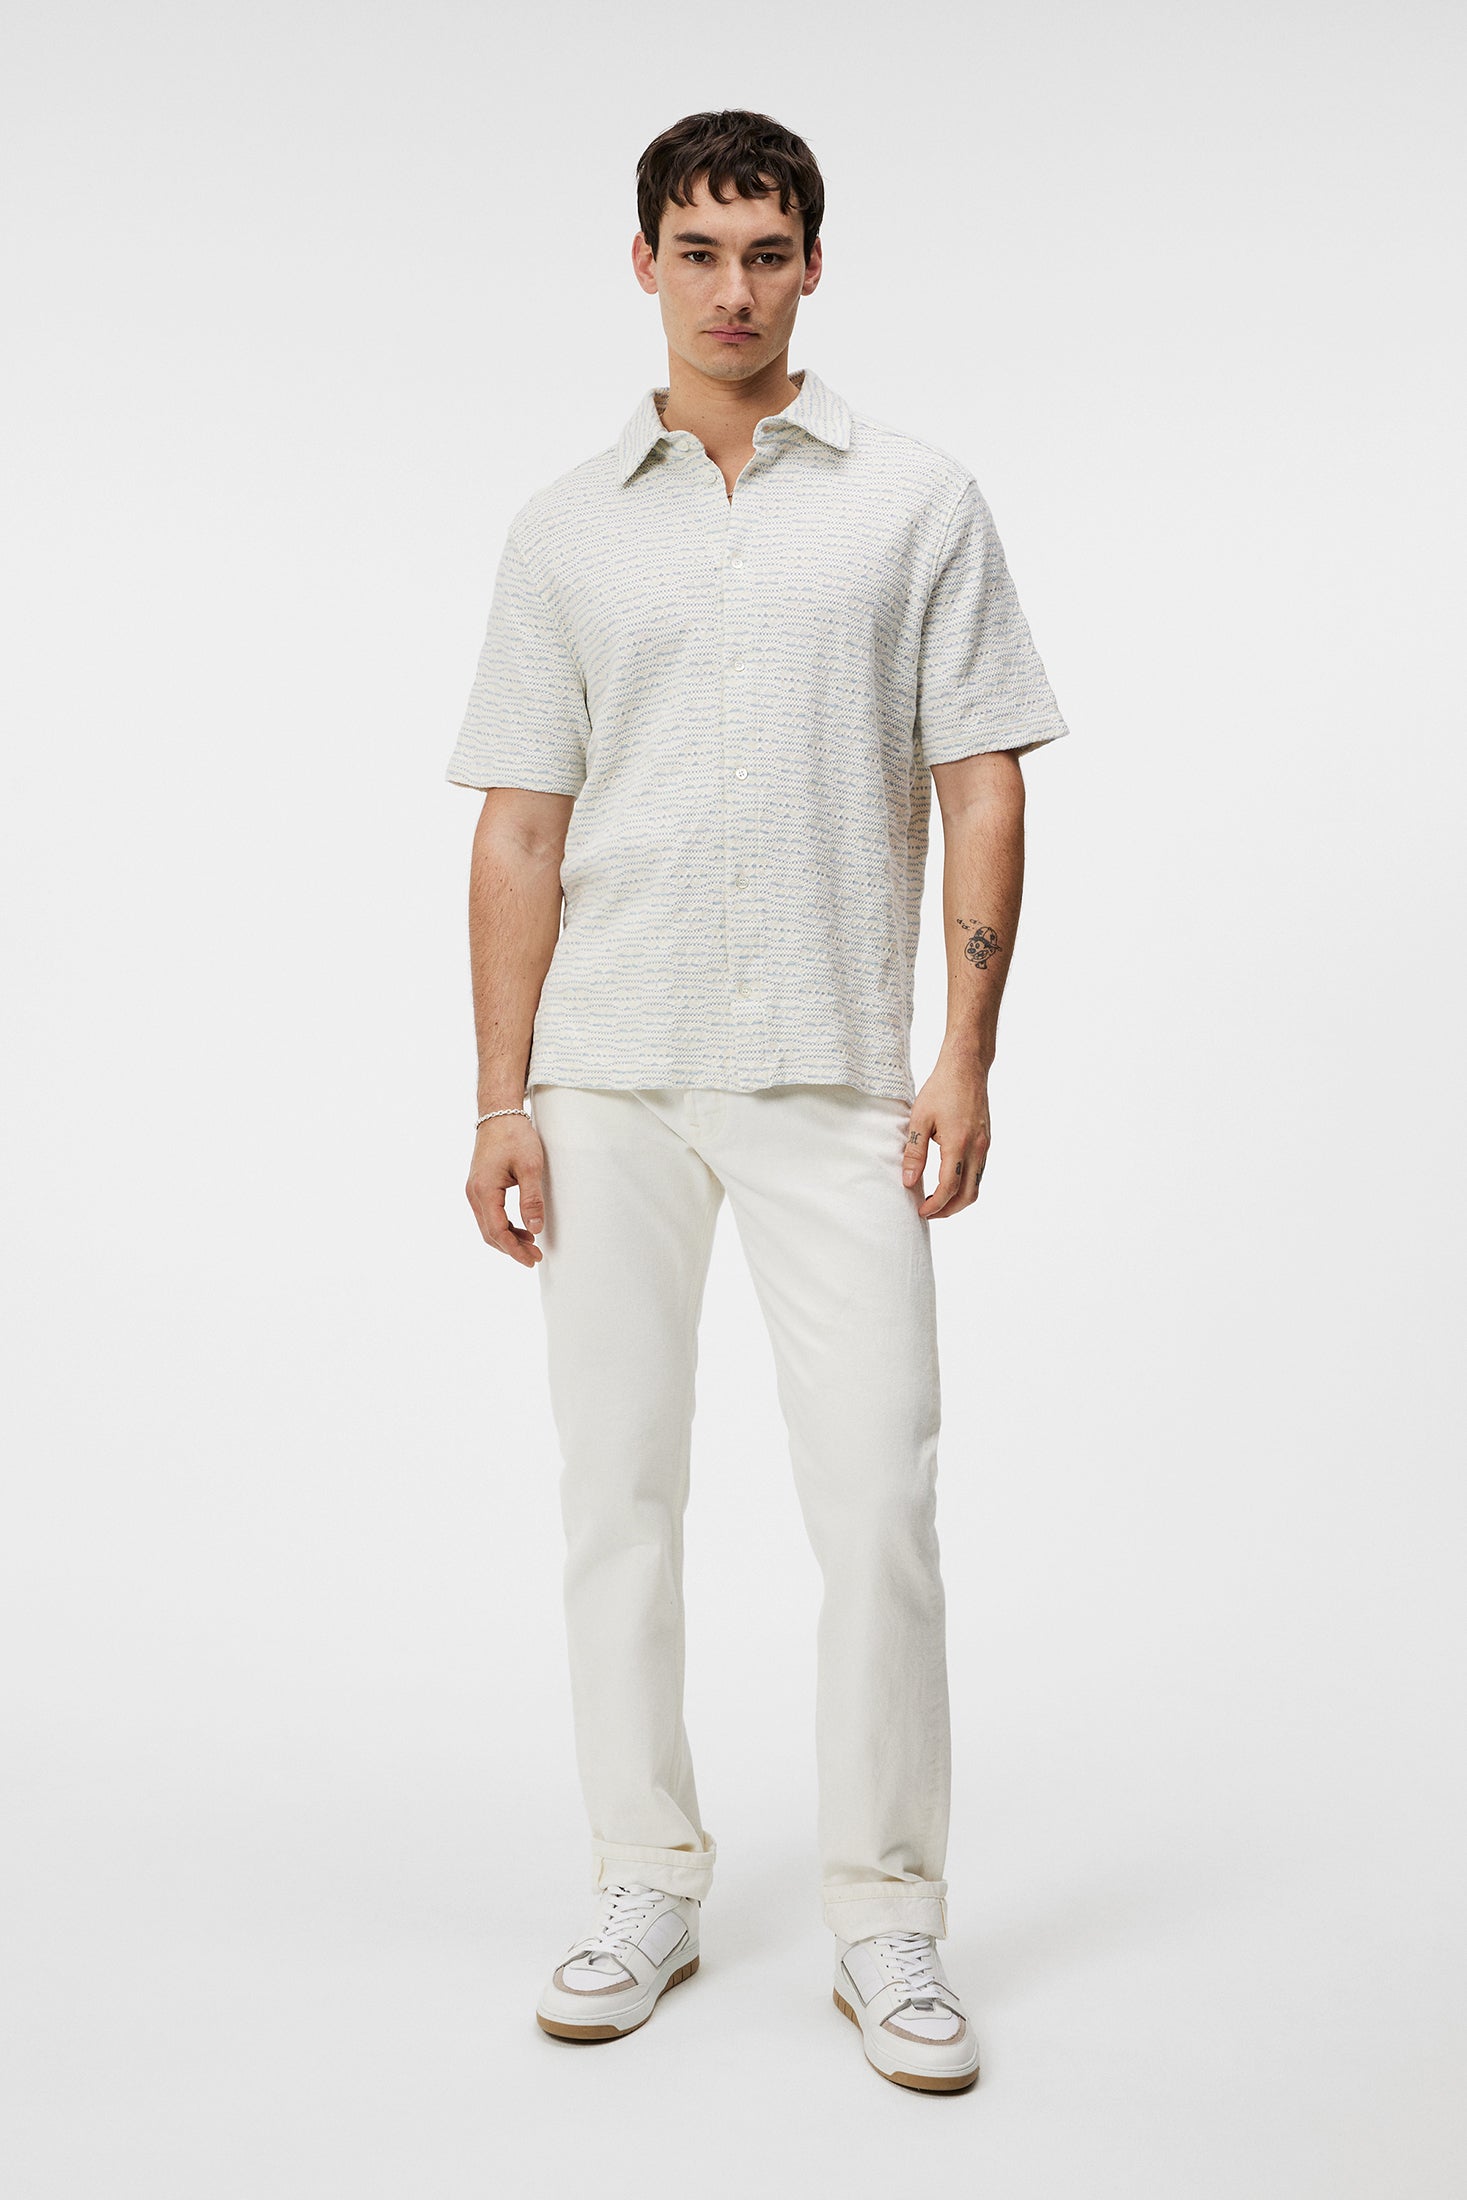 Torpa Structure Shirt